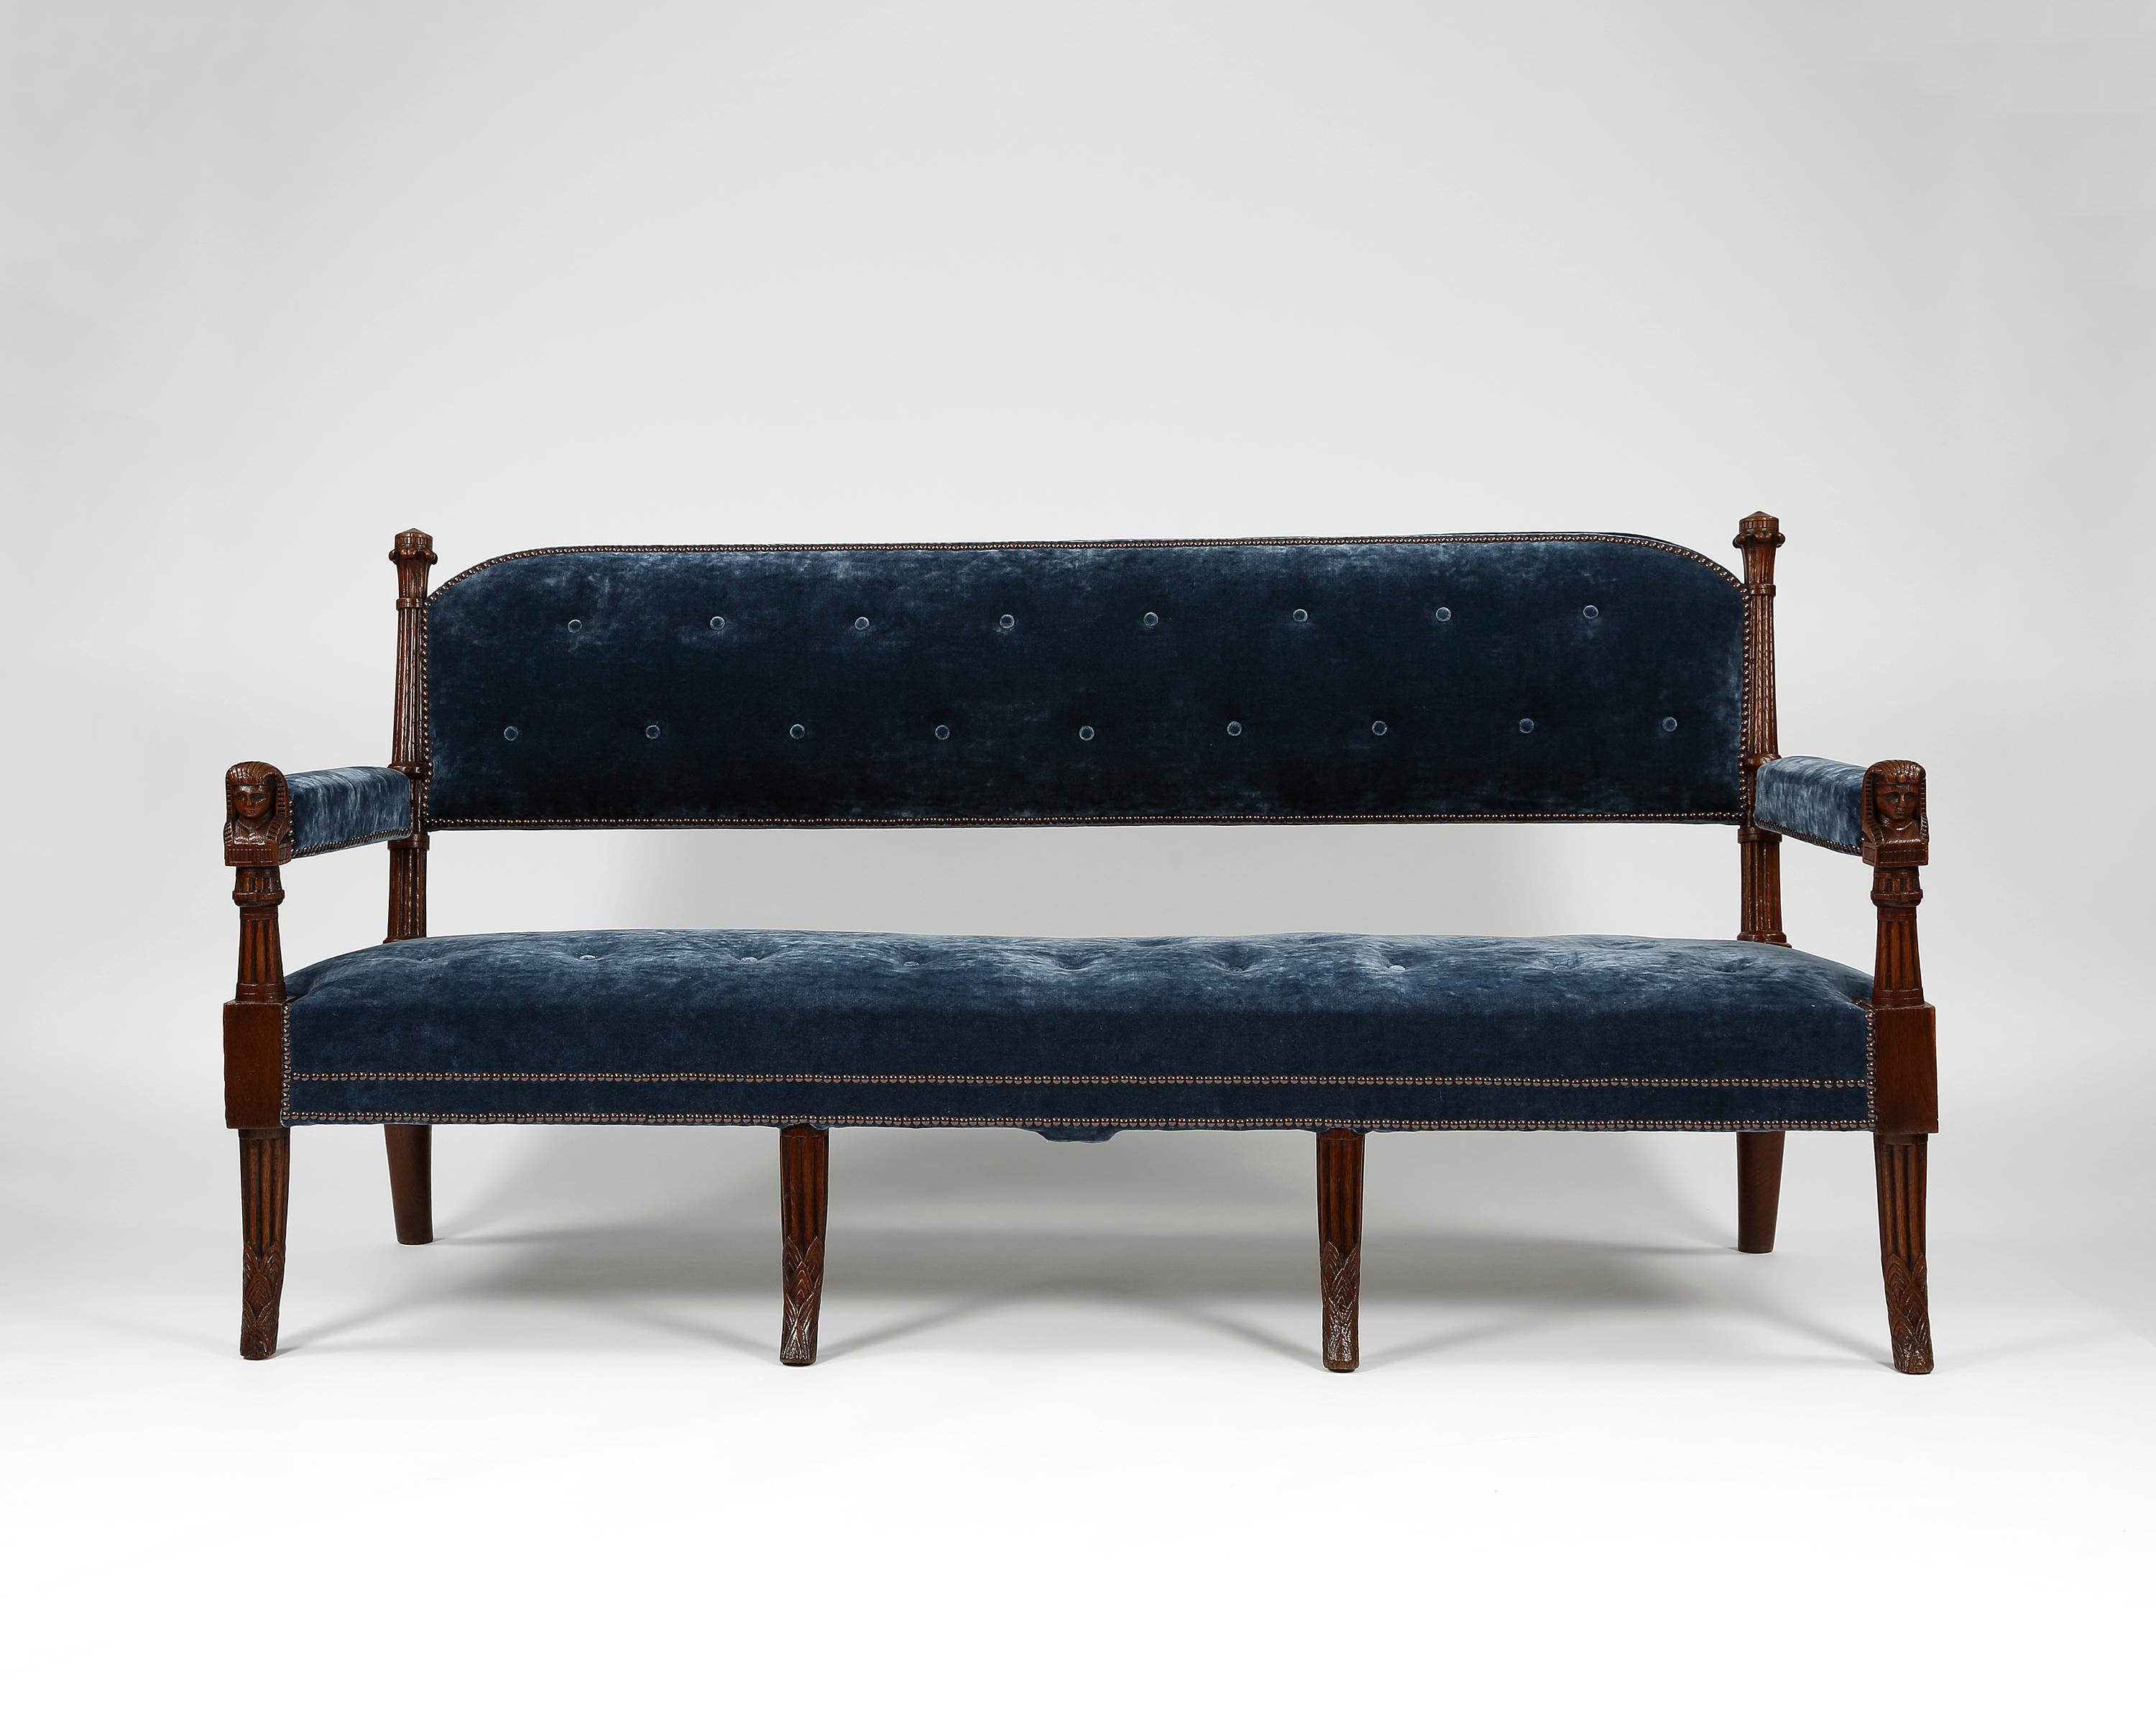 A fine pair of settees in the Egyptian design. The arms are headed with carved Egyptian style heads. Raised on four carved up-rights and upholstered in a velvet by Colefax and Fowler.
Similar furniture designs and furnishings can be seen at